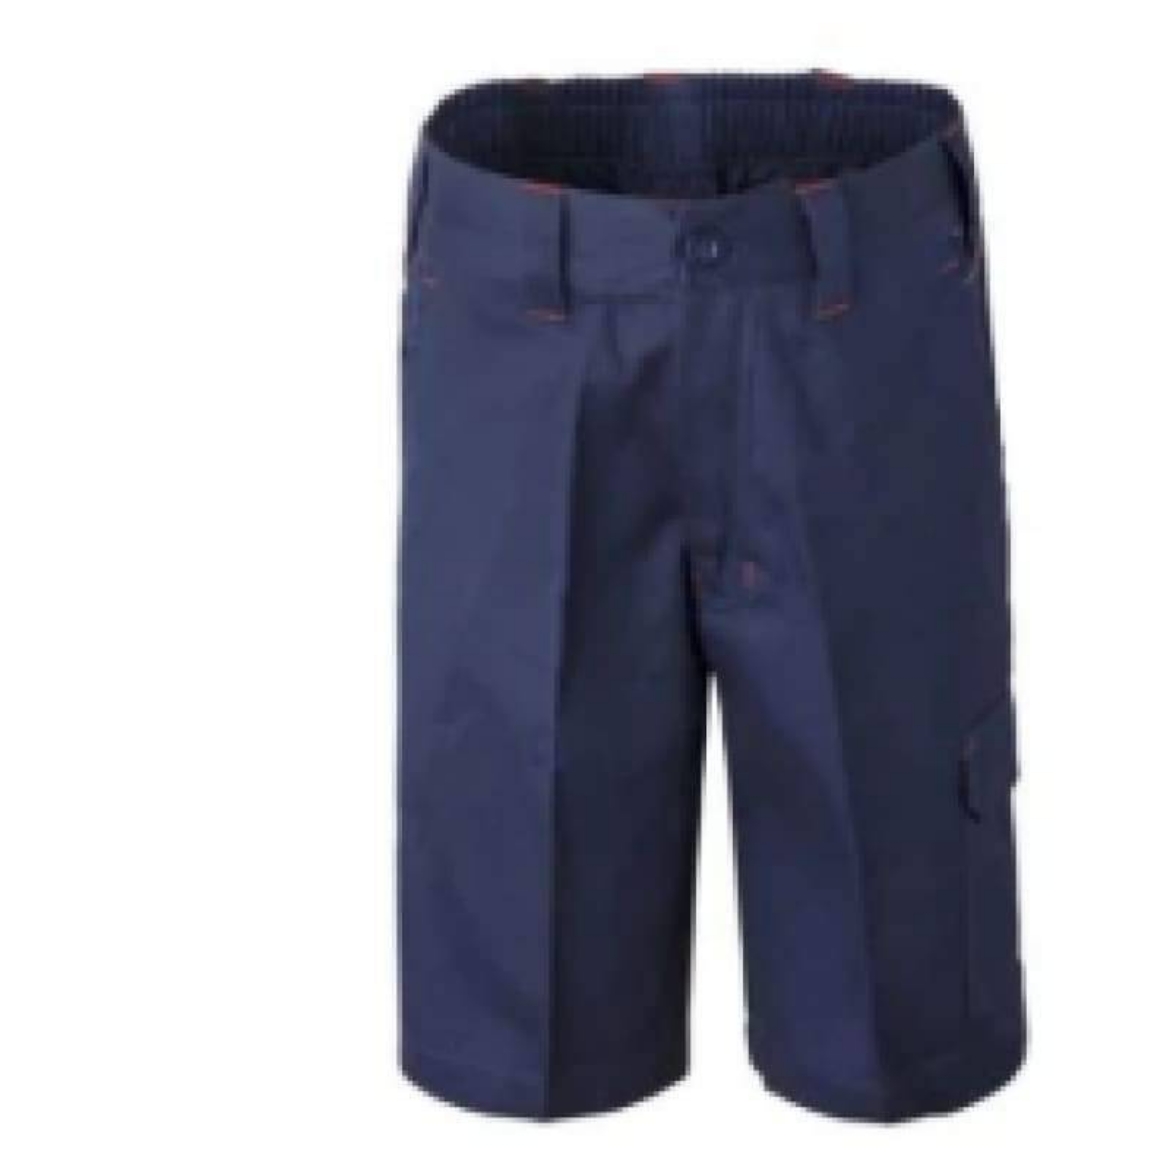 Picture of WorkCraft, Childrens, Shorts, Midweight Cargo Cotton Drill